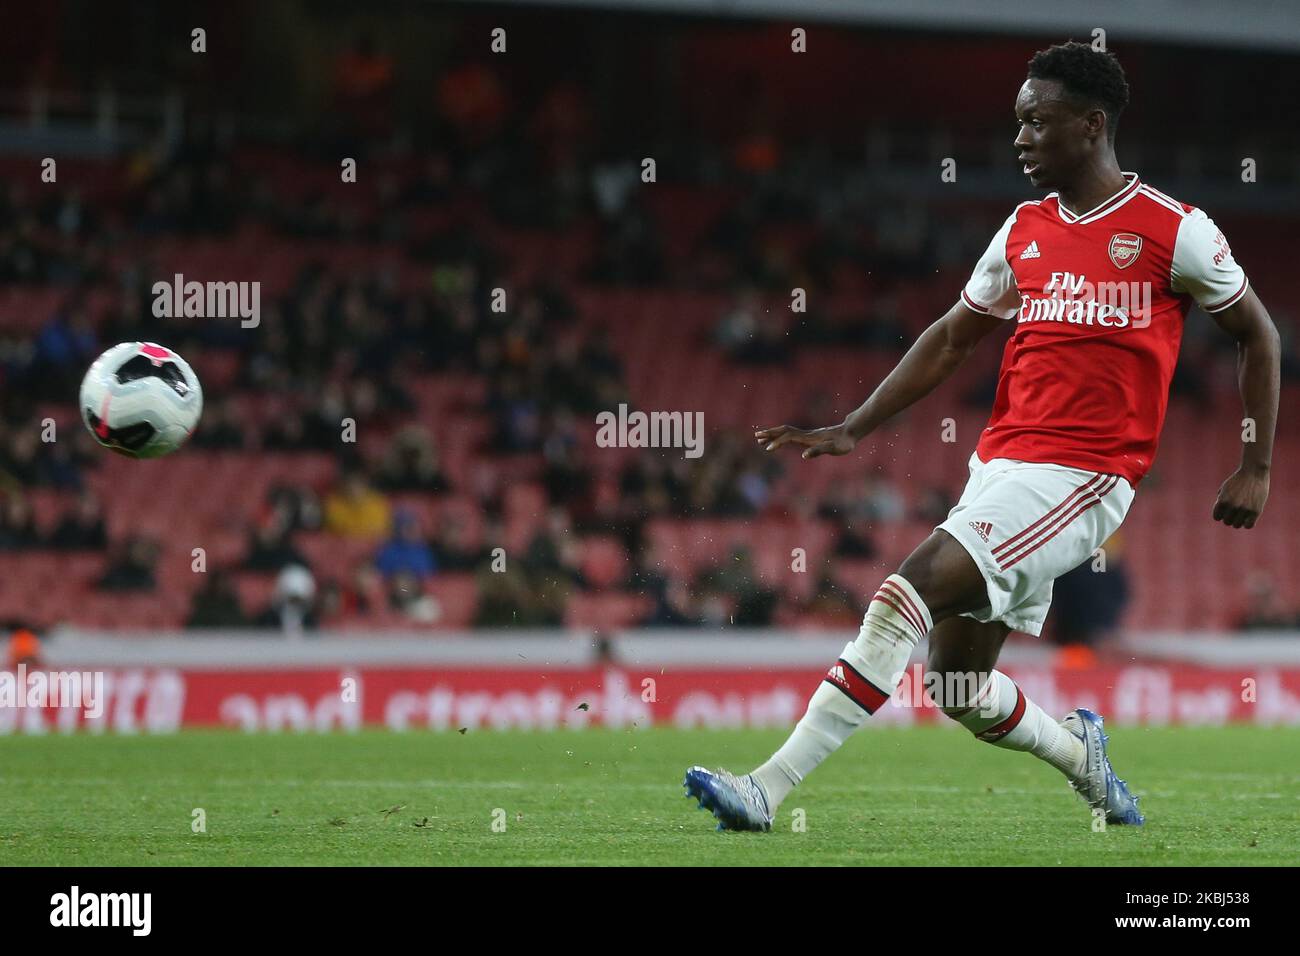 Florin Balogun of Arsenal u23 scoring an offside goal during the Premier League 2 match between Arsenal Under 23 and Manchester City Under 23 at the Emirates Stadium, London on Saturday 29th February 2020. (Photo by Jacques Feeney/MINews/NurPhoto) Stock Photo